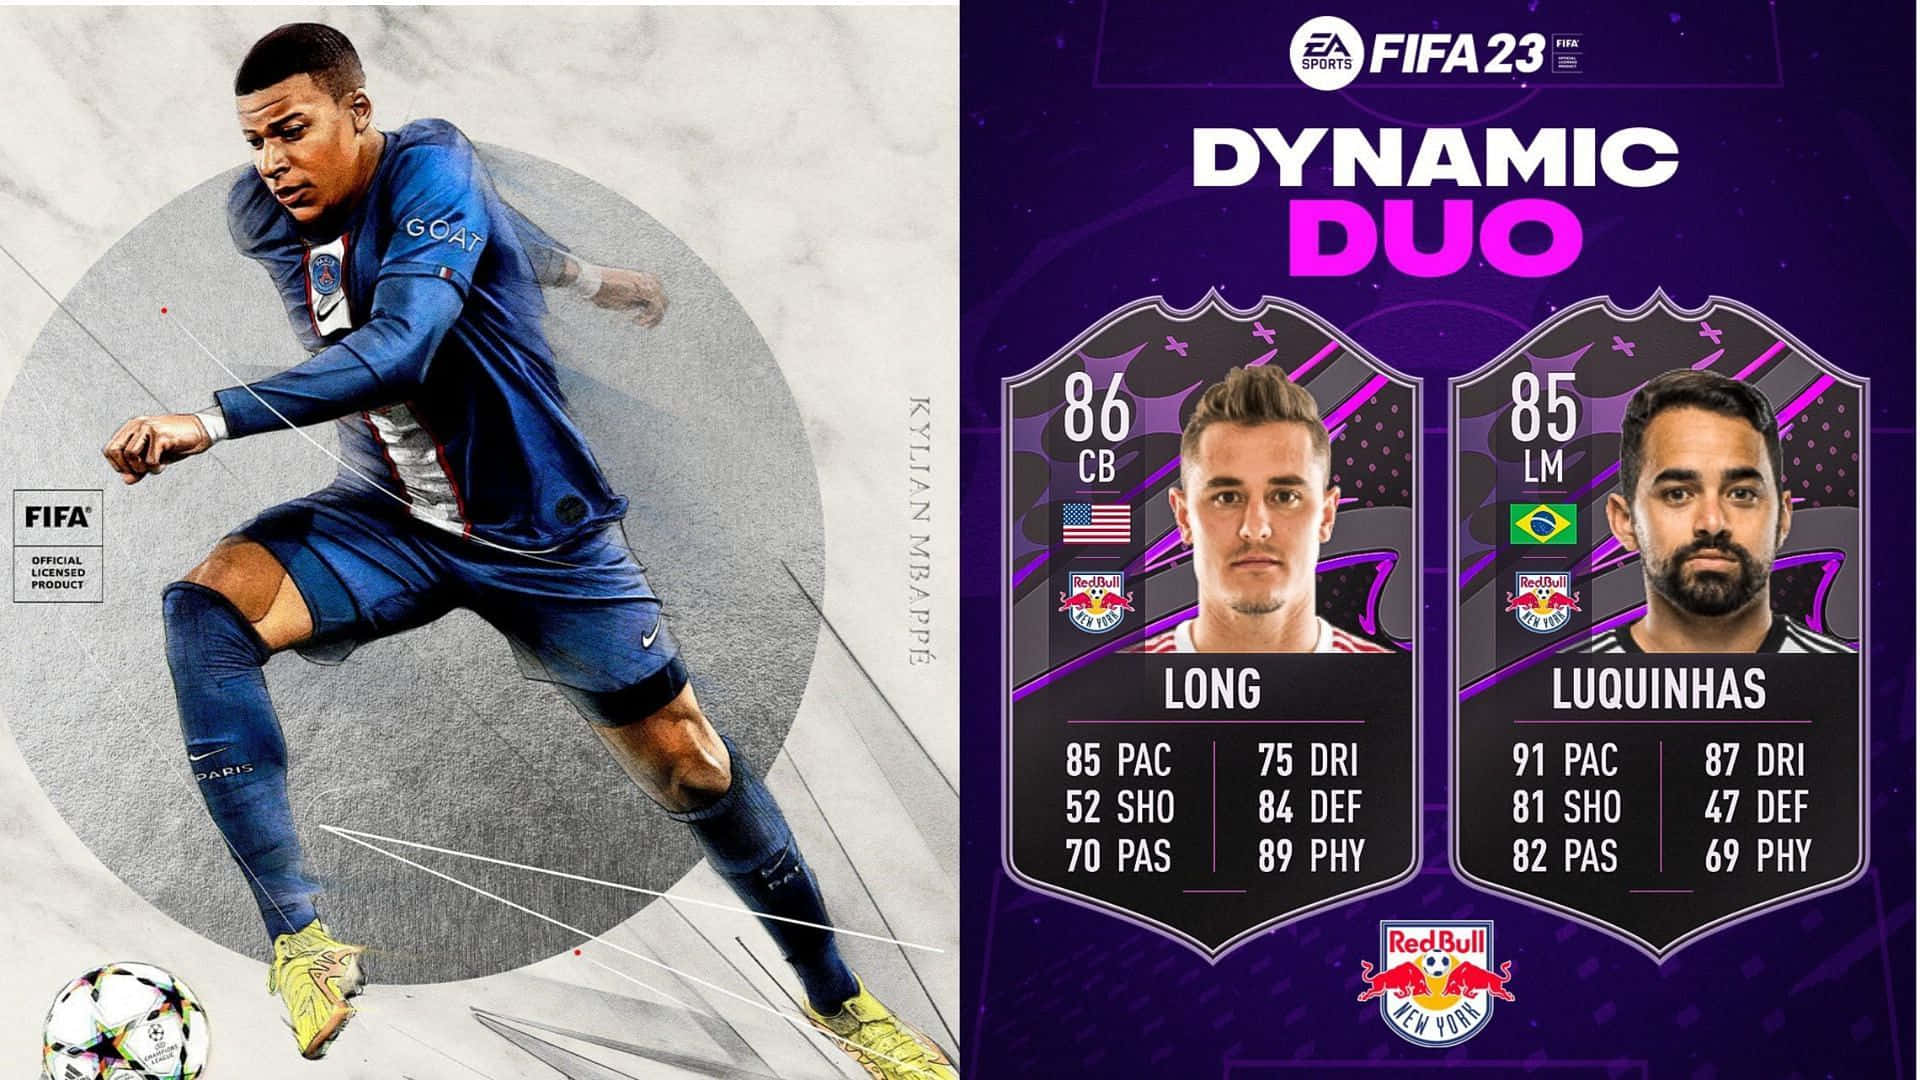 Footballers Luquinhas And Aaron Long In EA Sports FIFA 23 Wallpaper